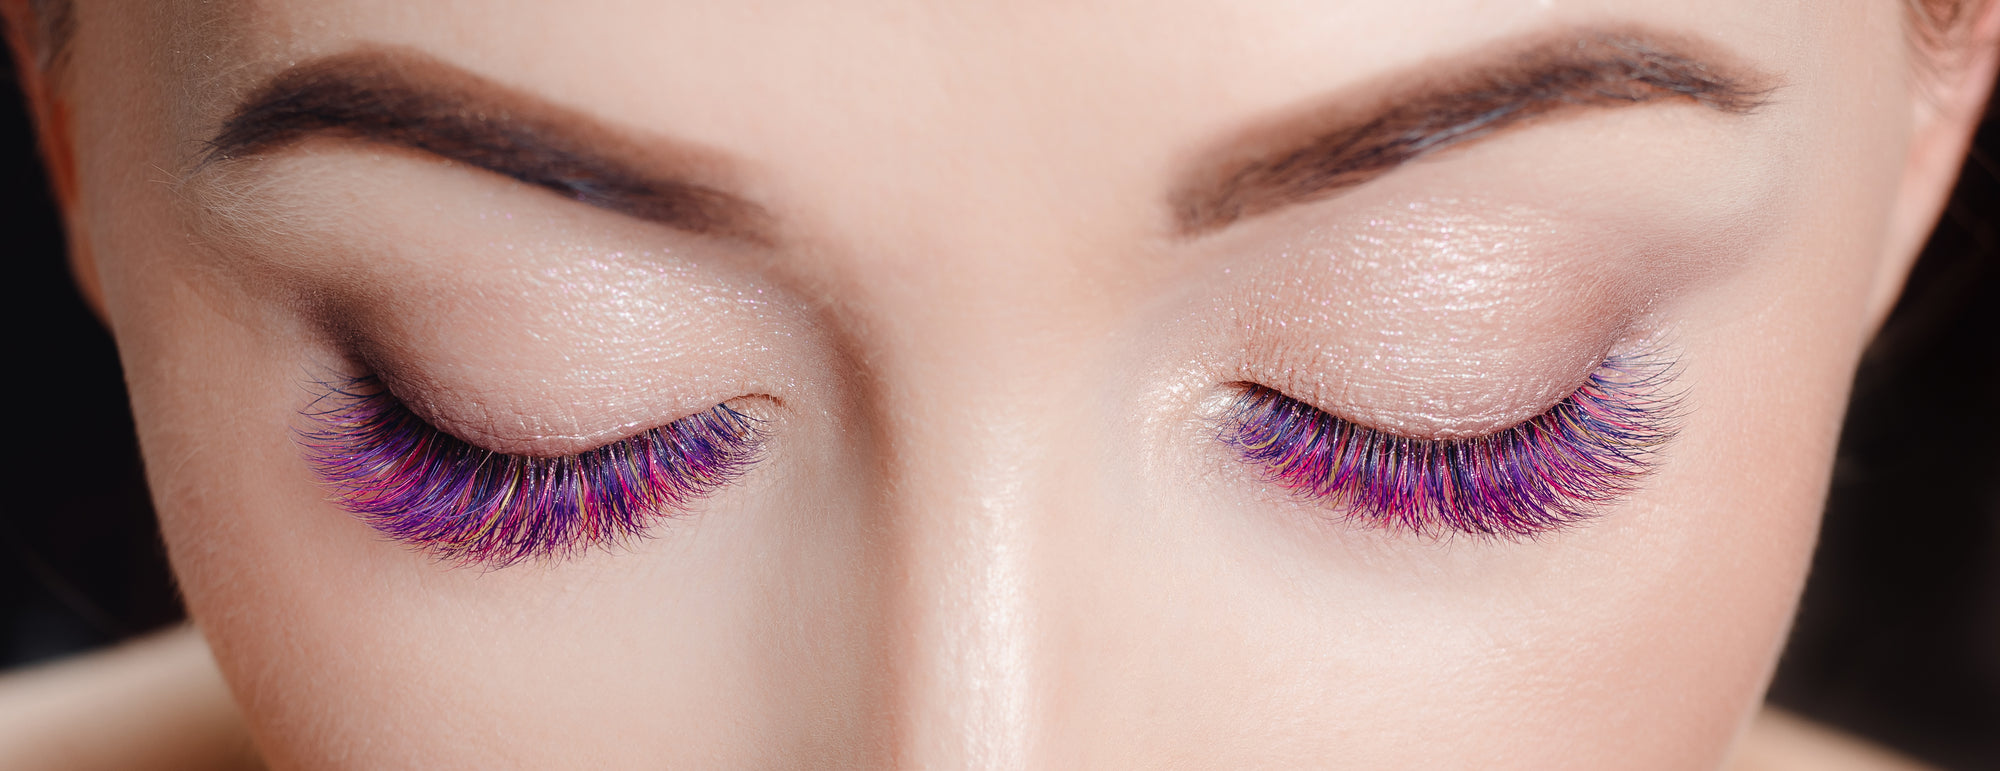 5 Essential Guidelines for Applying Gorgeous Colored Eyelash Extensions